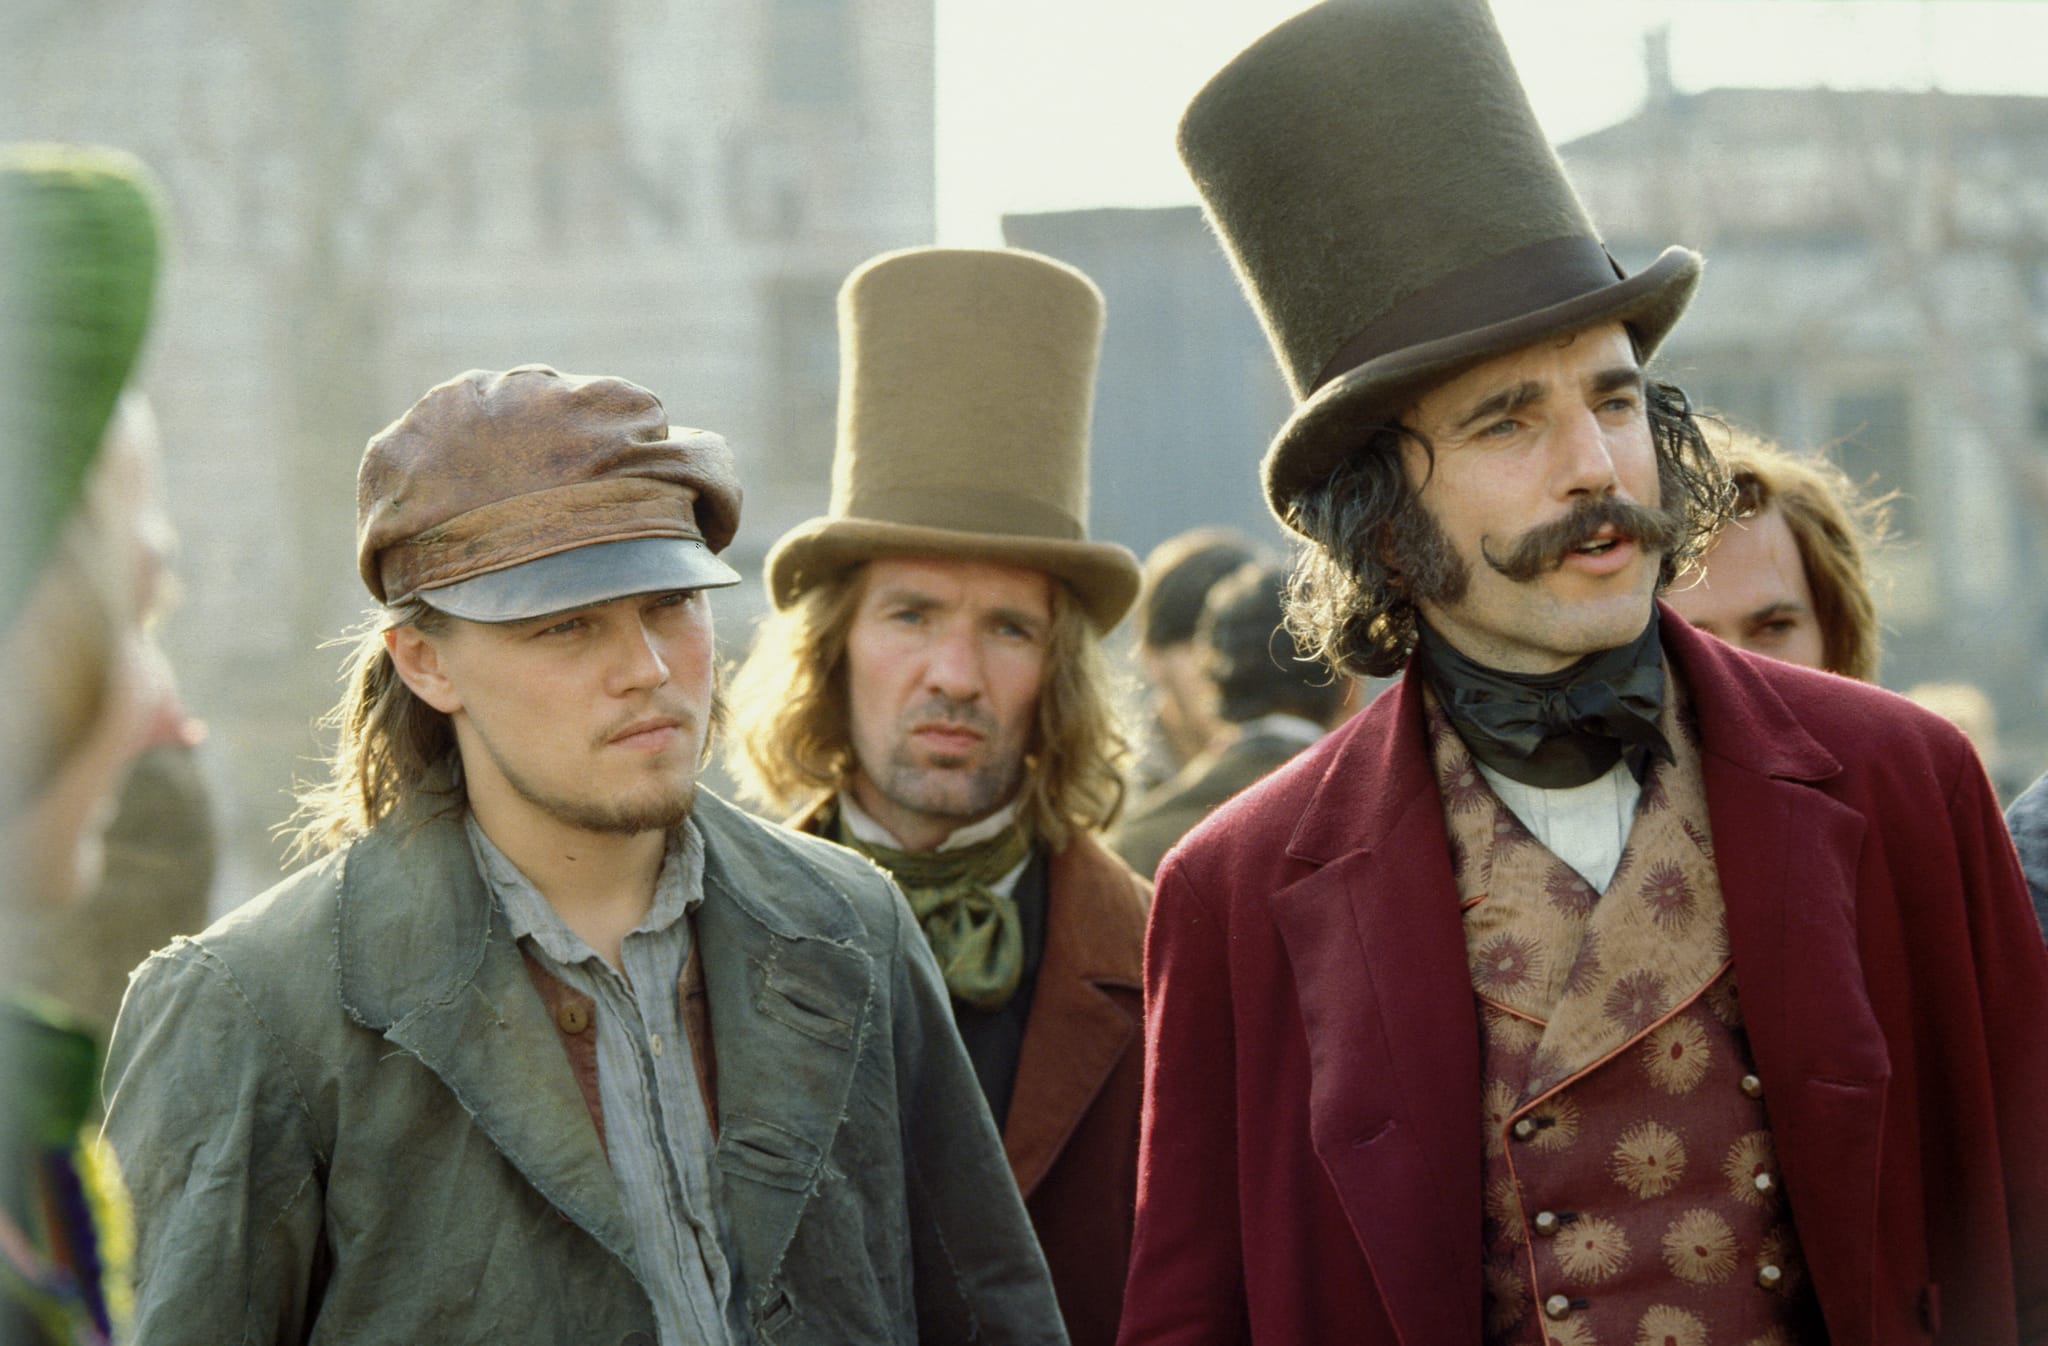 The Gangs of New York movie (2002)